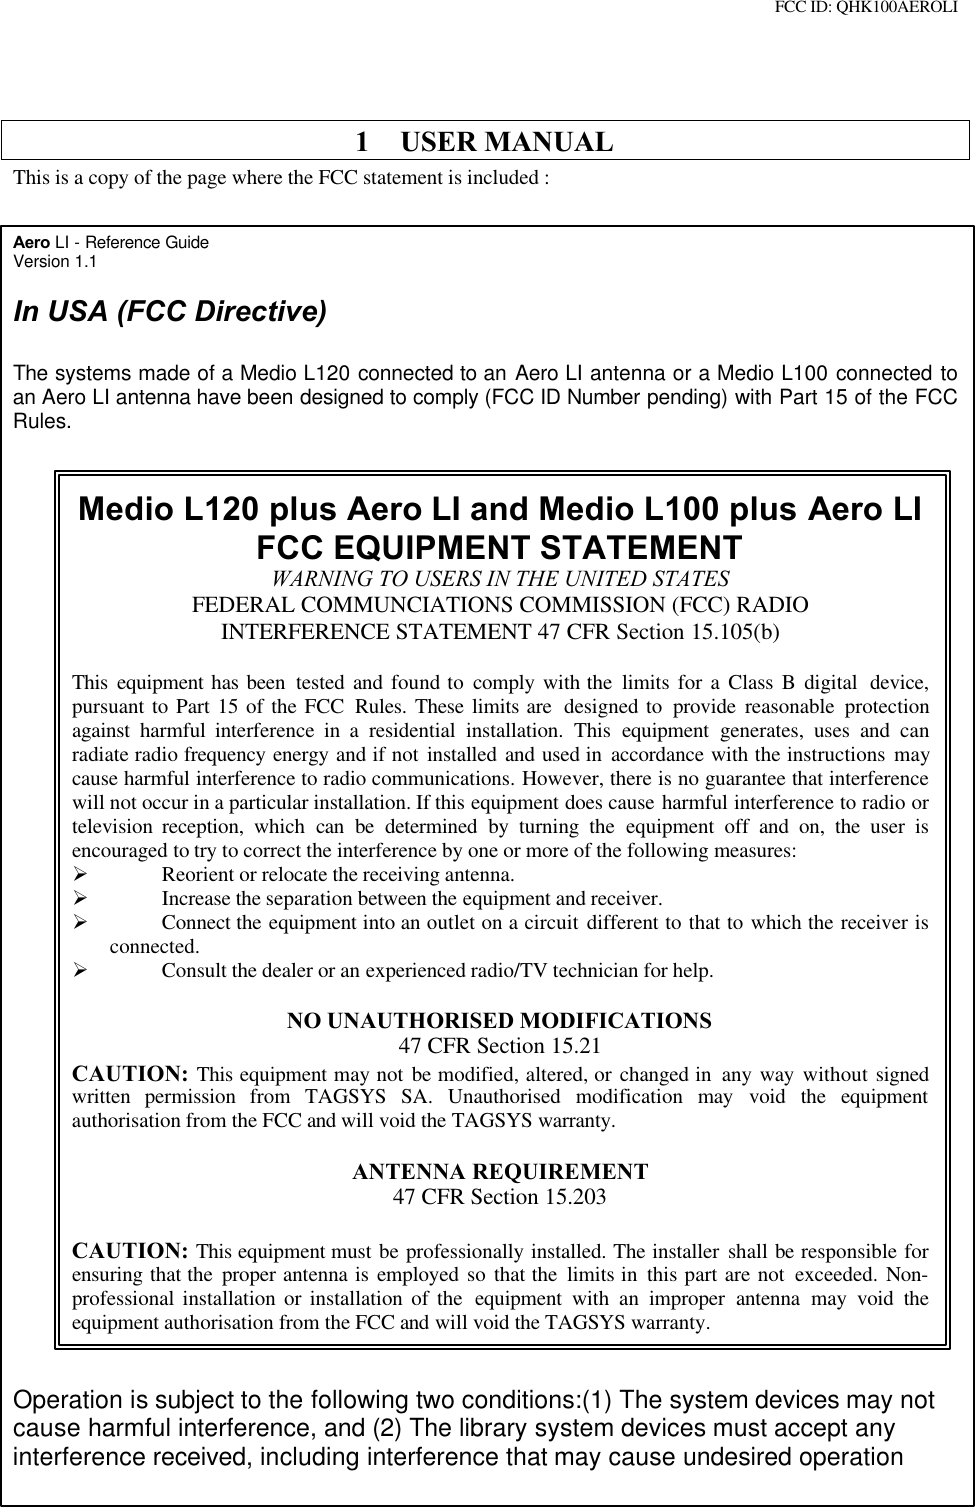 FCC ID: QHK100AEROLI1 USER MANUALThis is a copy of the page where the FCC statement is included :Aero LI - Reference GuideVersion 1.1In USA (FCC Directive)The systems made of a Medio L120 connected to an Aero LI antenna or a Medio L100 connected toan Aero LI antenna have been designed to comply (FCC ID Number pending) with Part 15 of the FCCRules.Medio L120 plus Aero LI and Medio L100 plus Aero LIFCC EQUIPMENT STATEMENTWARNING TO USERS IN THE UNITED STATESFEDERAL COMMUNCIATIONS COMMISSION (FCC) RADIOINTERFERENCE STATEMENT 47 CFR Section 15.105(b)This  equipment has been tested and found to comply  with the limits for a Class B digital  device,pursuant to Part 15 of the FCC Rules. These limits are  designed to provide  reasonable protectionagainst  harmful  interference in a residential installation. This equipment  generates, uses and  canradiate radio frequency energy and if not installed and used in accordance with the instructions maycause harmful interference to radio communications. However, there is no guarantee that interferencewill not occur in a particular installation. If this equipment does cause harmful interference to radio ortelevision  reception,  which  can  be  determined by turning the equipment off and on, the user isencouraged to try to correct the interference by one or more of the following measures:Ø Reorient or relocate the receiving antenna.Ø Increase the separation between the equipment and receiver.Ø Connect the equipment into an outlet on a circuit different to that to which the receiver isconnected.Ø Consult the dealer or an experienced radio/TV technician for help.NO UNAUTHORISED MODIFICATIONS47 CFR Section 15.21CAUTION: This equipment may not be modified, altered, or changed in  any way  without signedwritten permission from TAGSYS SA. Unauthorised modification may  void the equipmentauthorisation from the FCC and will void the TAGSYS warranty.ANTENNA REQUIREMENT47 CFR Section 15.203CAUTION: This equipment must be professionally installed. The installer shall be responsible forensuring that the proper antenna is employed so that the limits in this part are not exceeded. Non-professional installation or installation of the  equipment  with an improper  antenna  may  void theequipment authorisation from the FCC and will void the TAGSYS warranty.Operation is subject to the following two conditions:(1) The system devices may notcause harmful interference, and (2) The library system devices must accept anyinterference received, including interference that may cause undesired operation